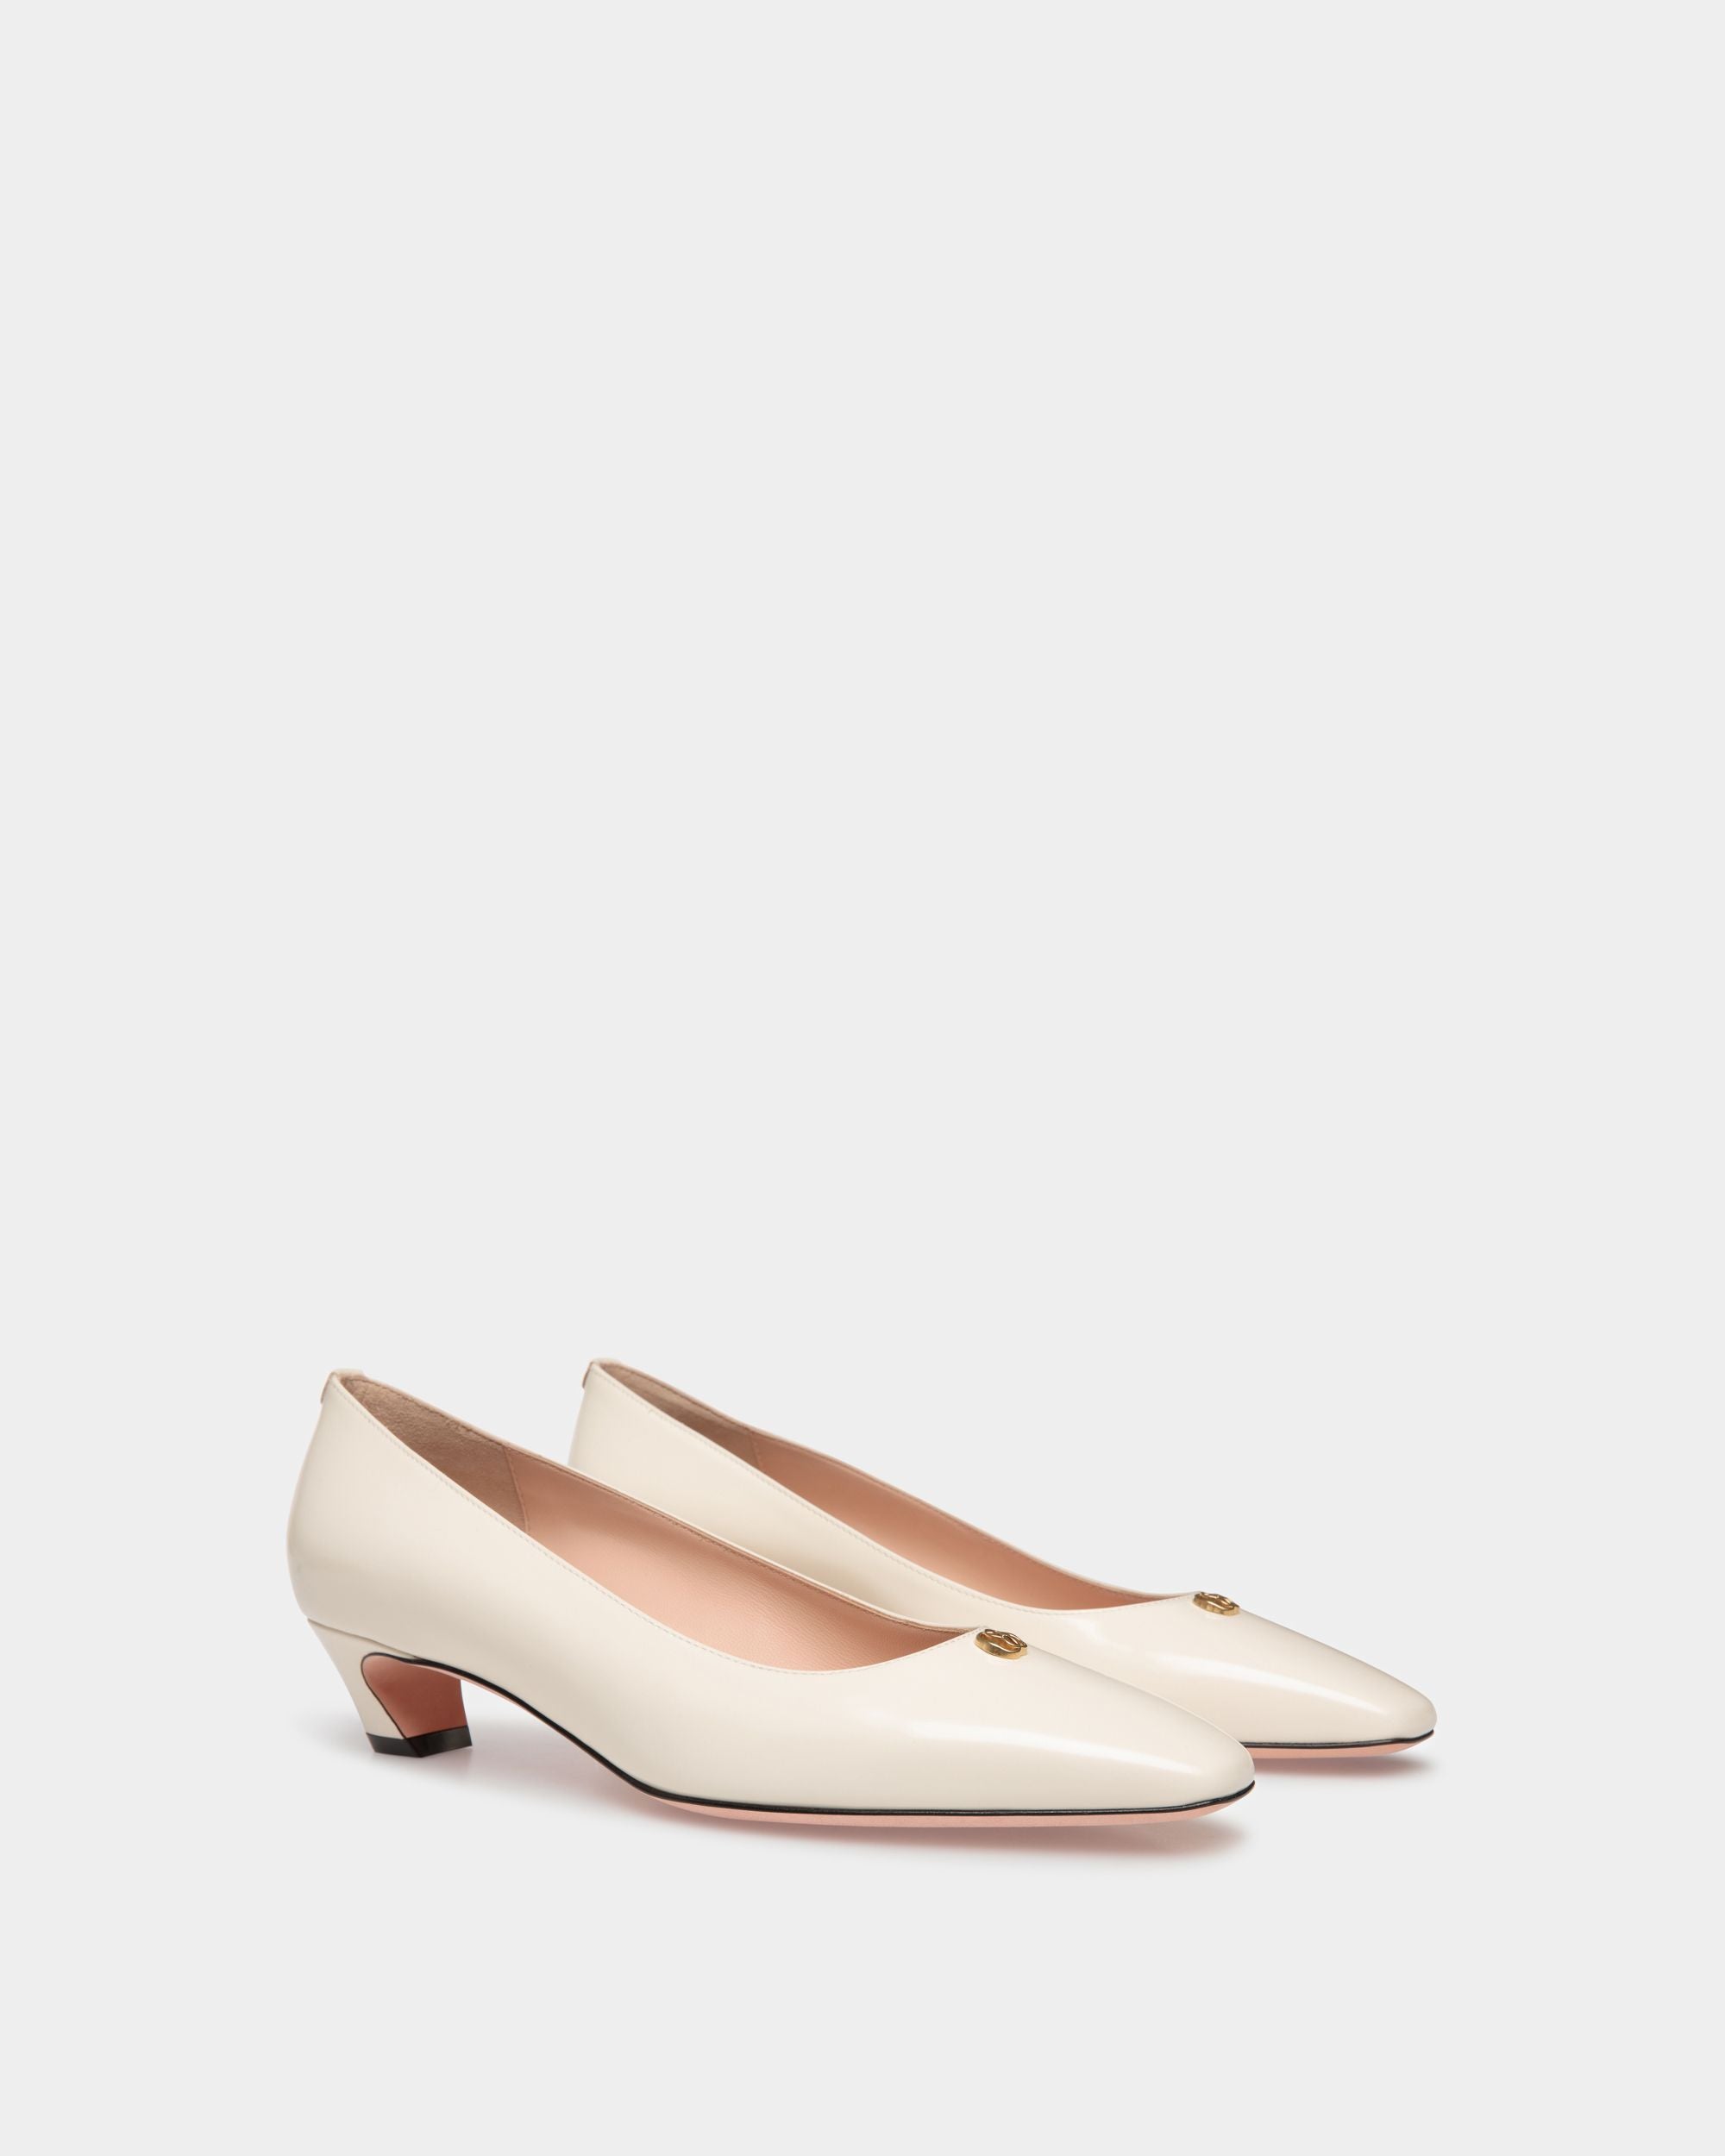 Sylt | Women's Pump in White Leather | Bally | Still Life 3/4 Front